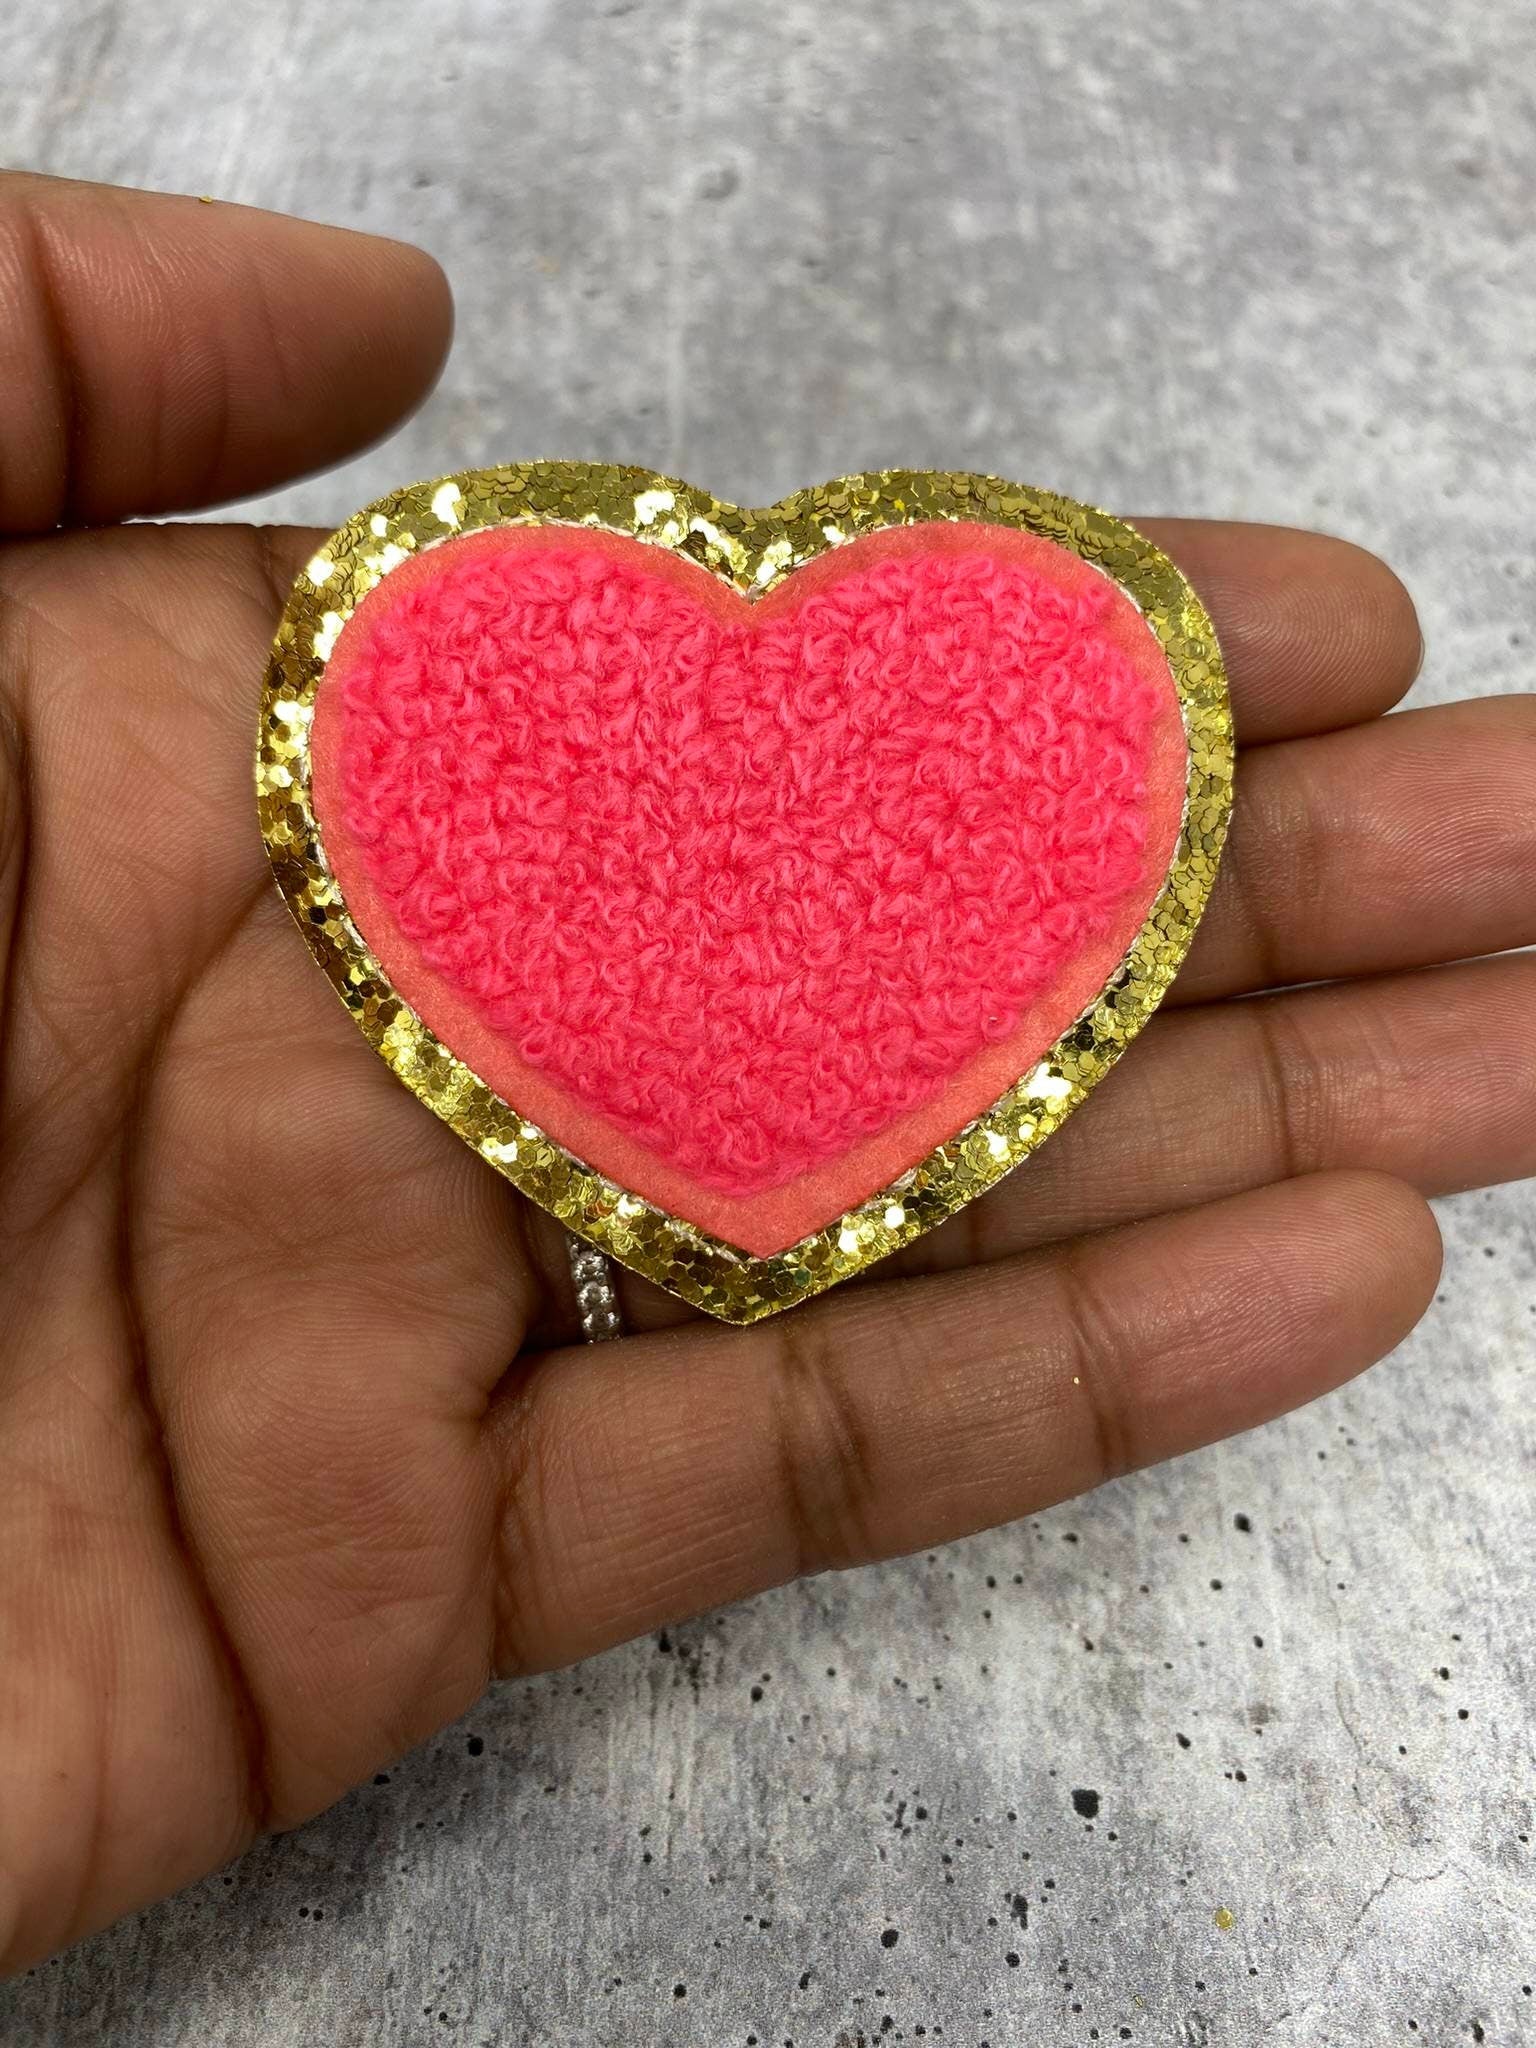 1pc Heart Design Iron-on Patch